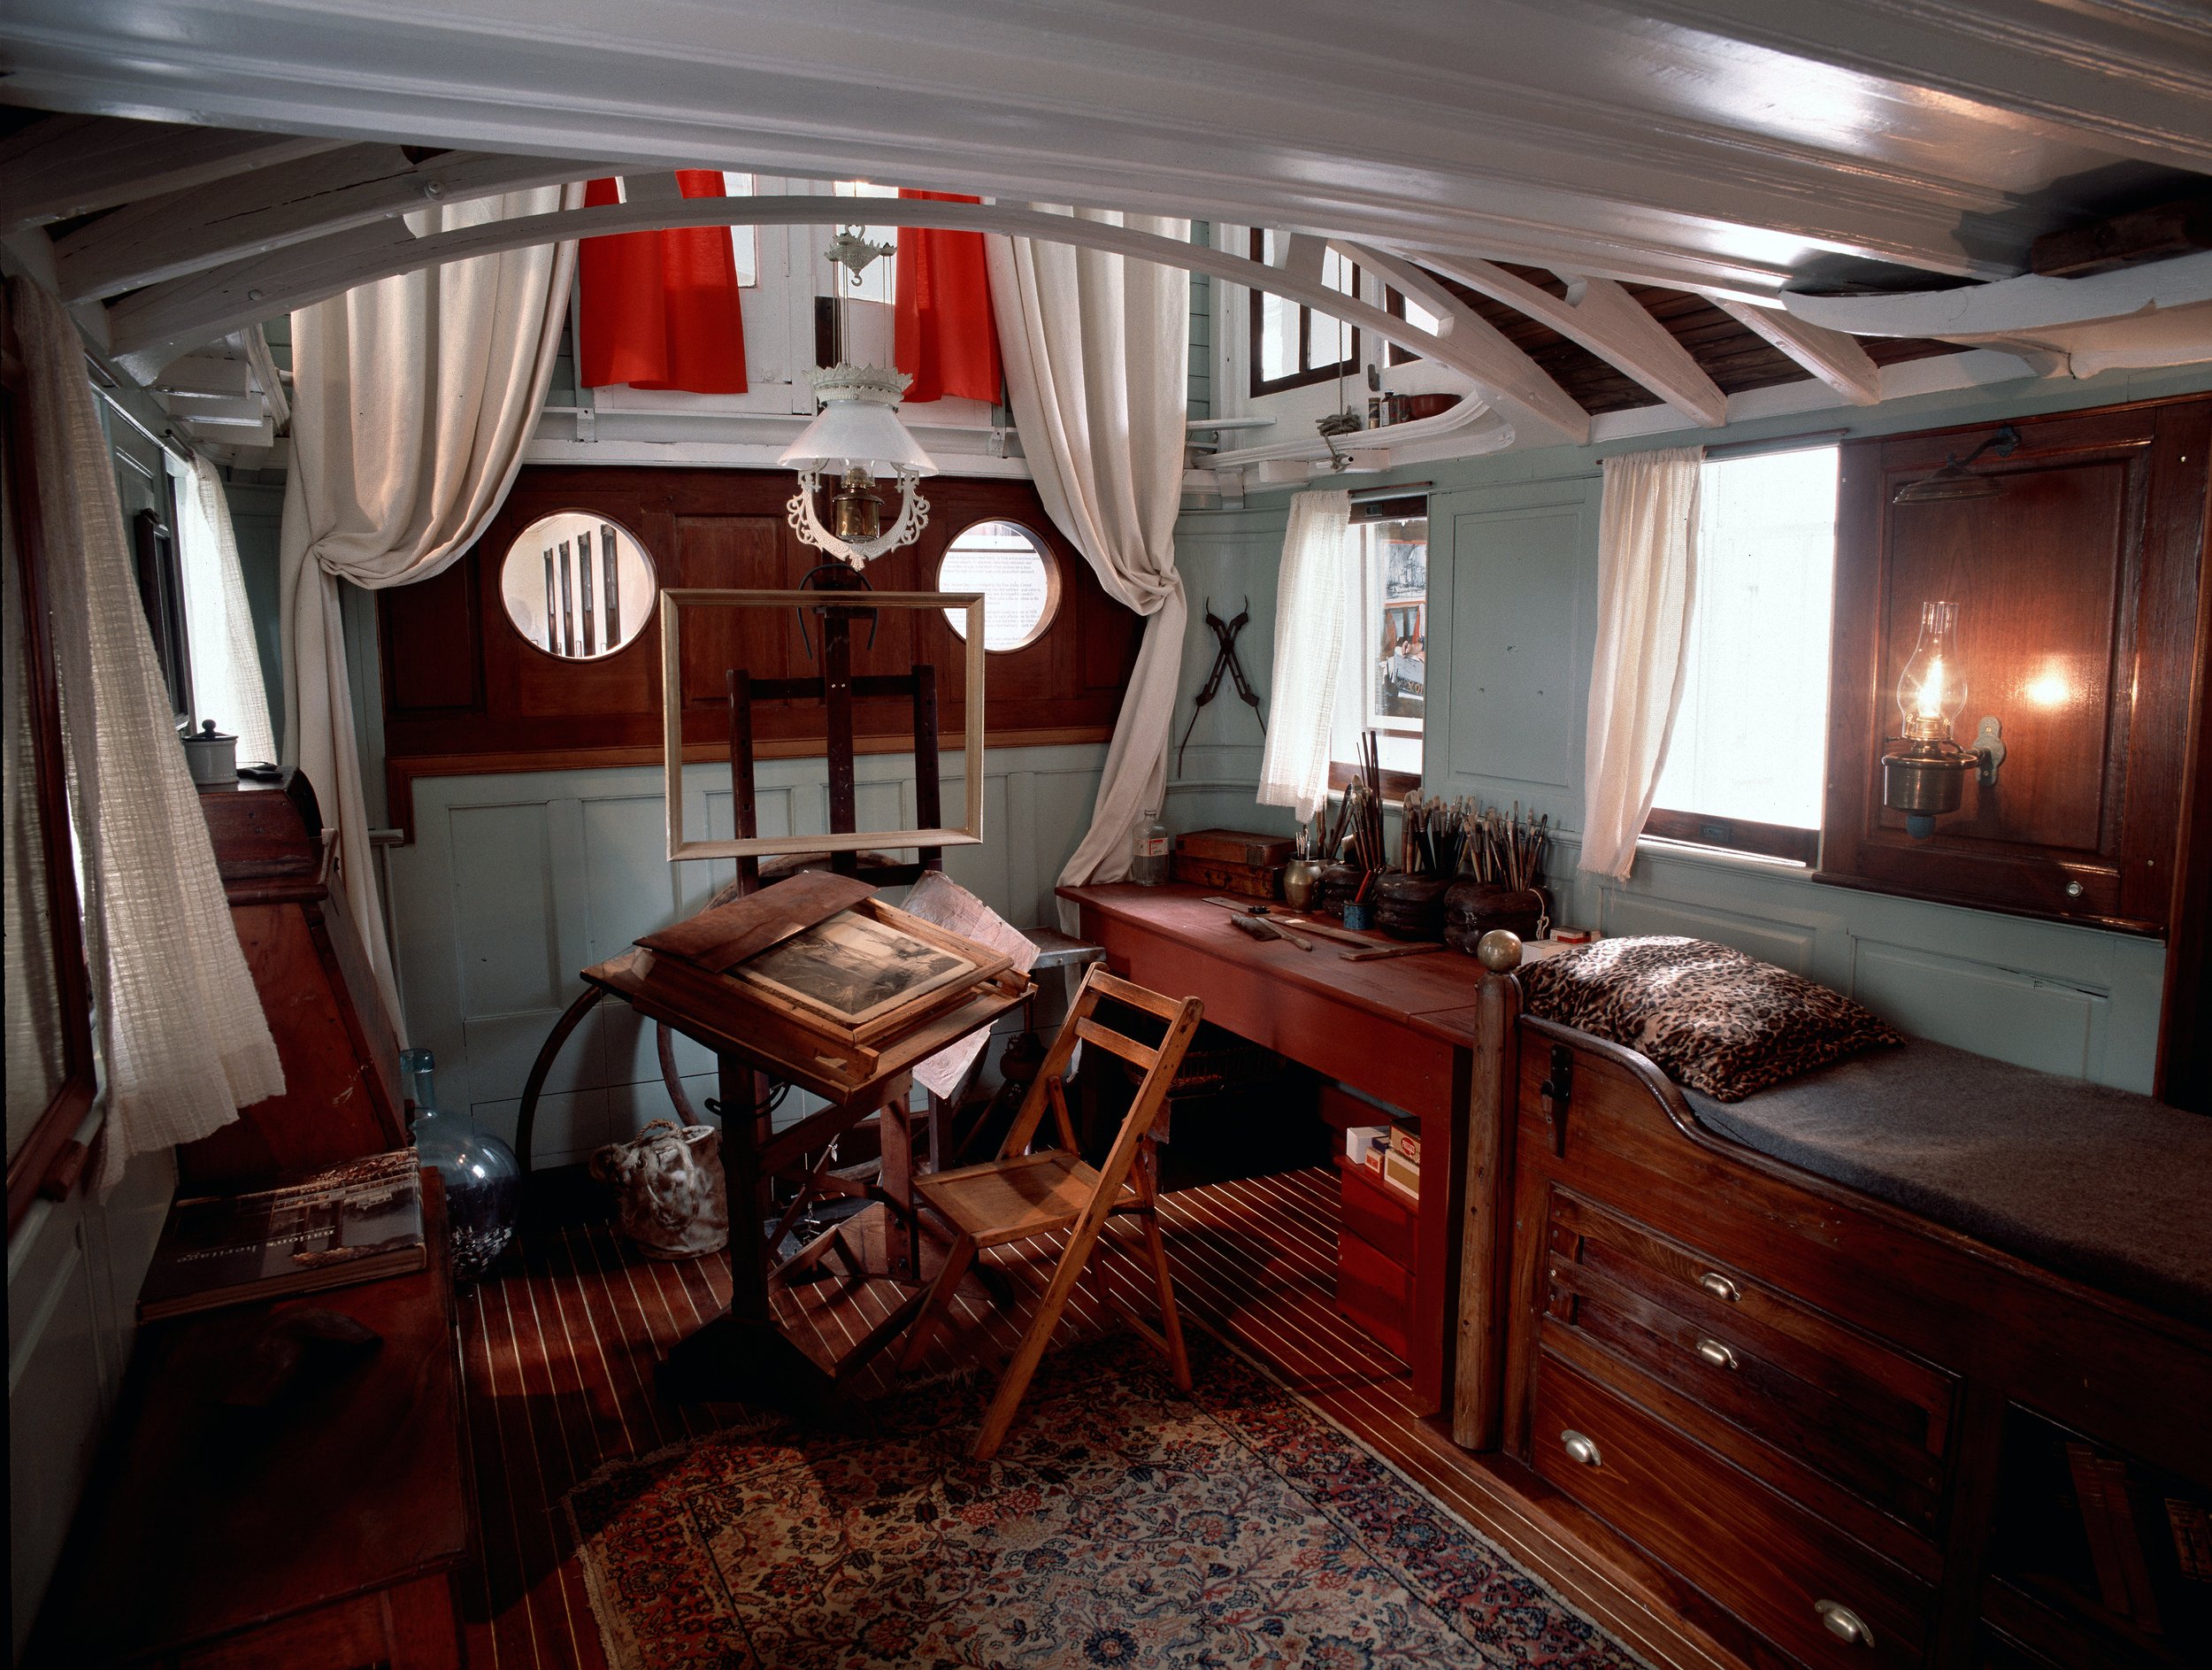 The-Noble-Maritime-Collection-Interior-of-the-houseboat-studio-of-John-A-Noble-Photo-by-Michael-Falco.jpg